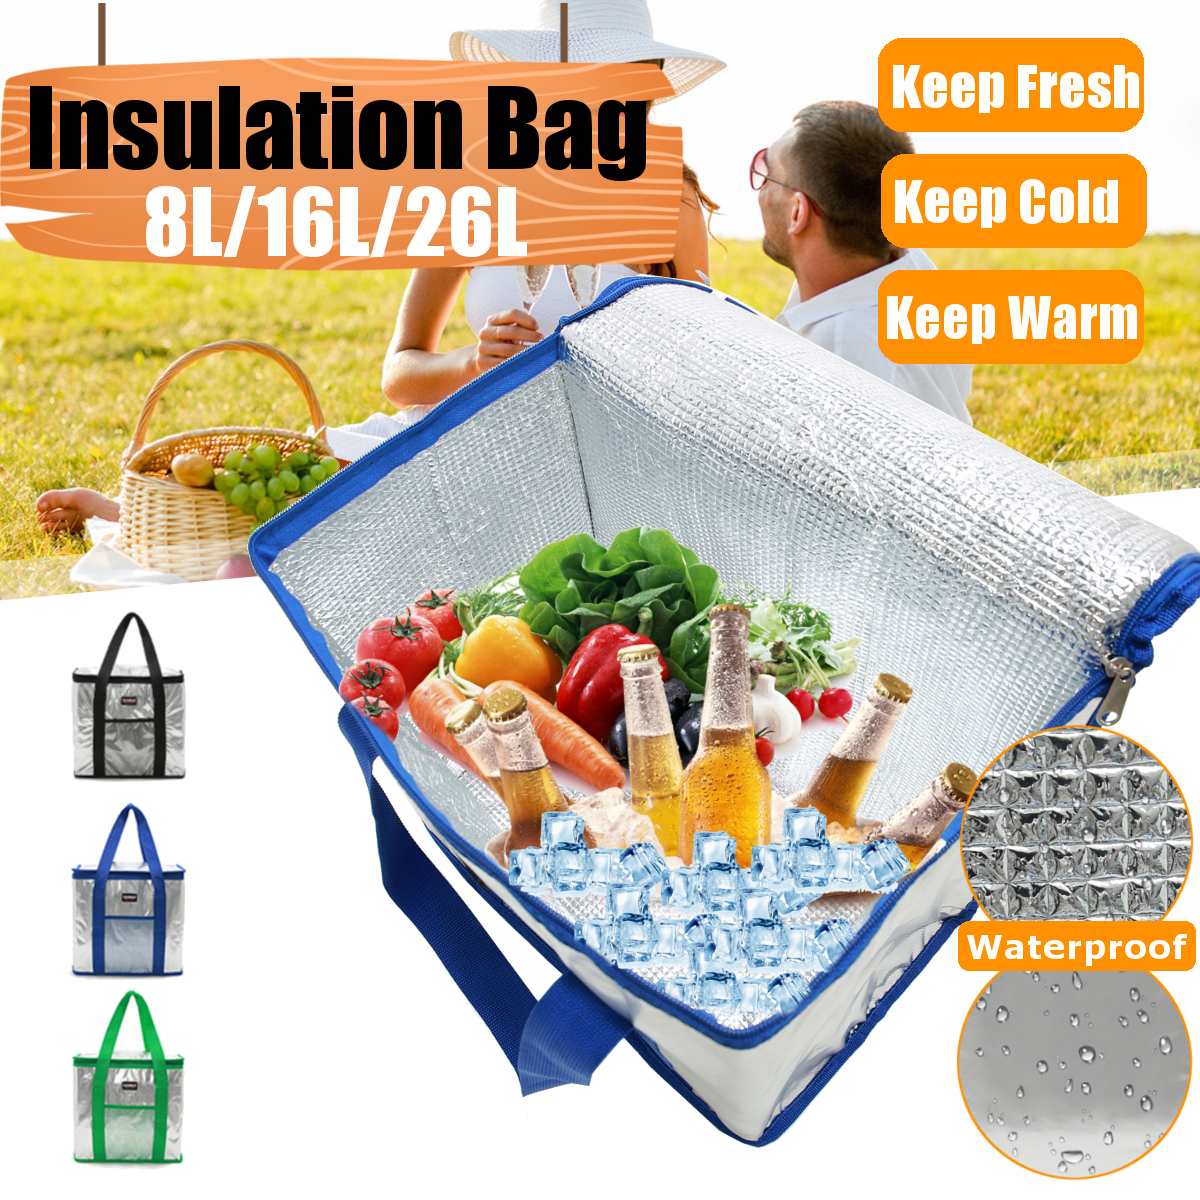 81626L-Picnic-Bag-Food-Delivery-Insulated-Bag-Lunch-Box-Storage-Bag-Outdoor-Camping-Travel-1855998-1